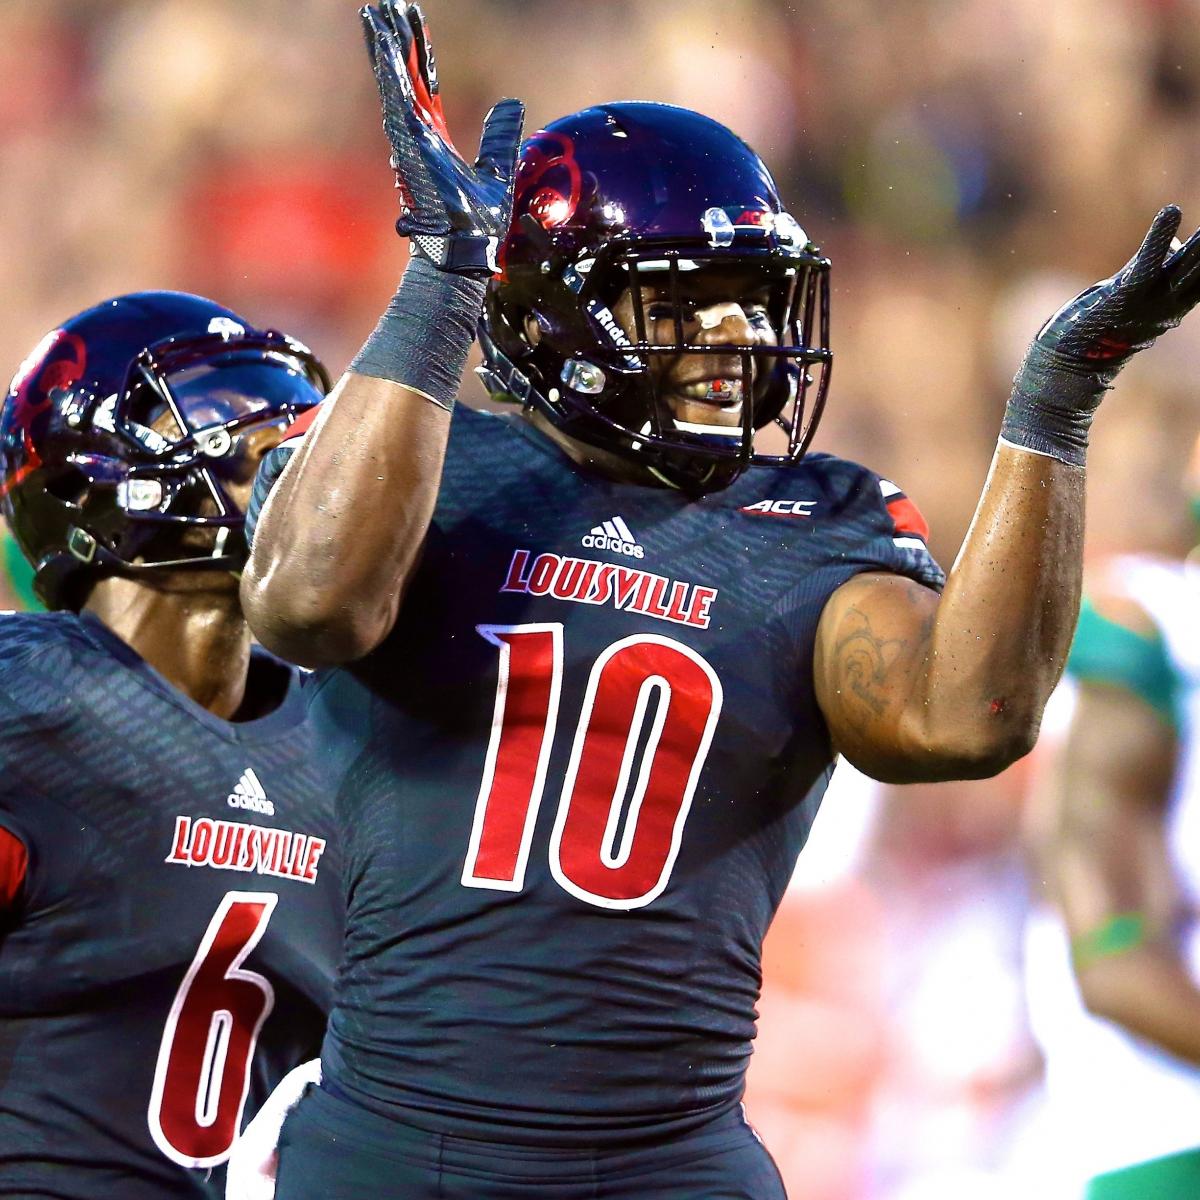 Miami vs. Louisville: Live Score and Highlights | Bleacher Report | Latest News, Videos and ...